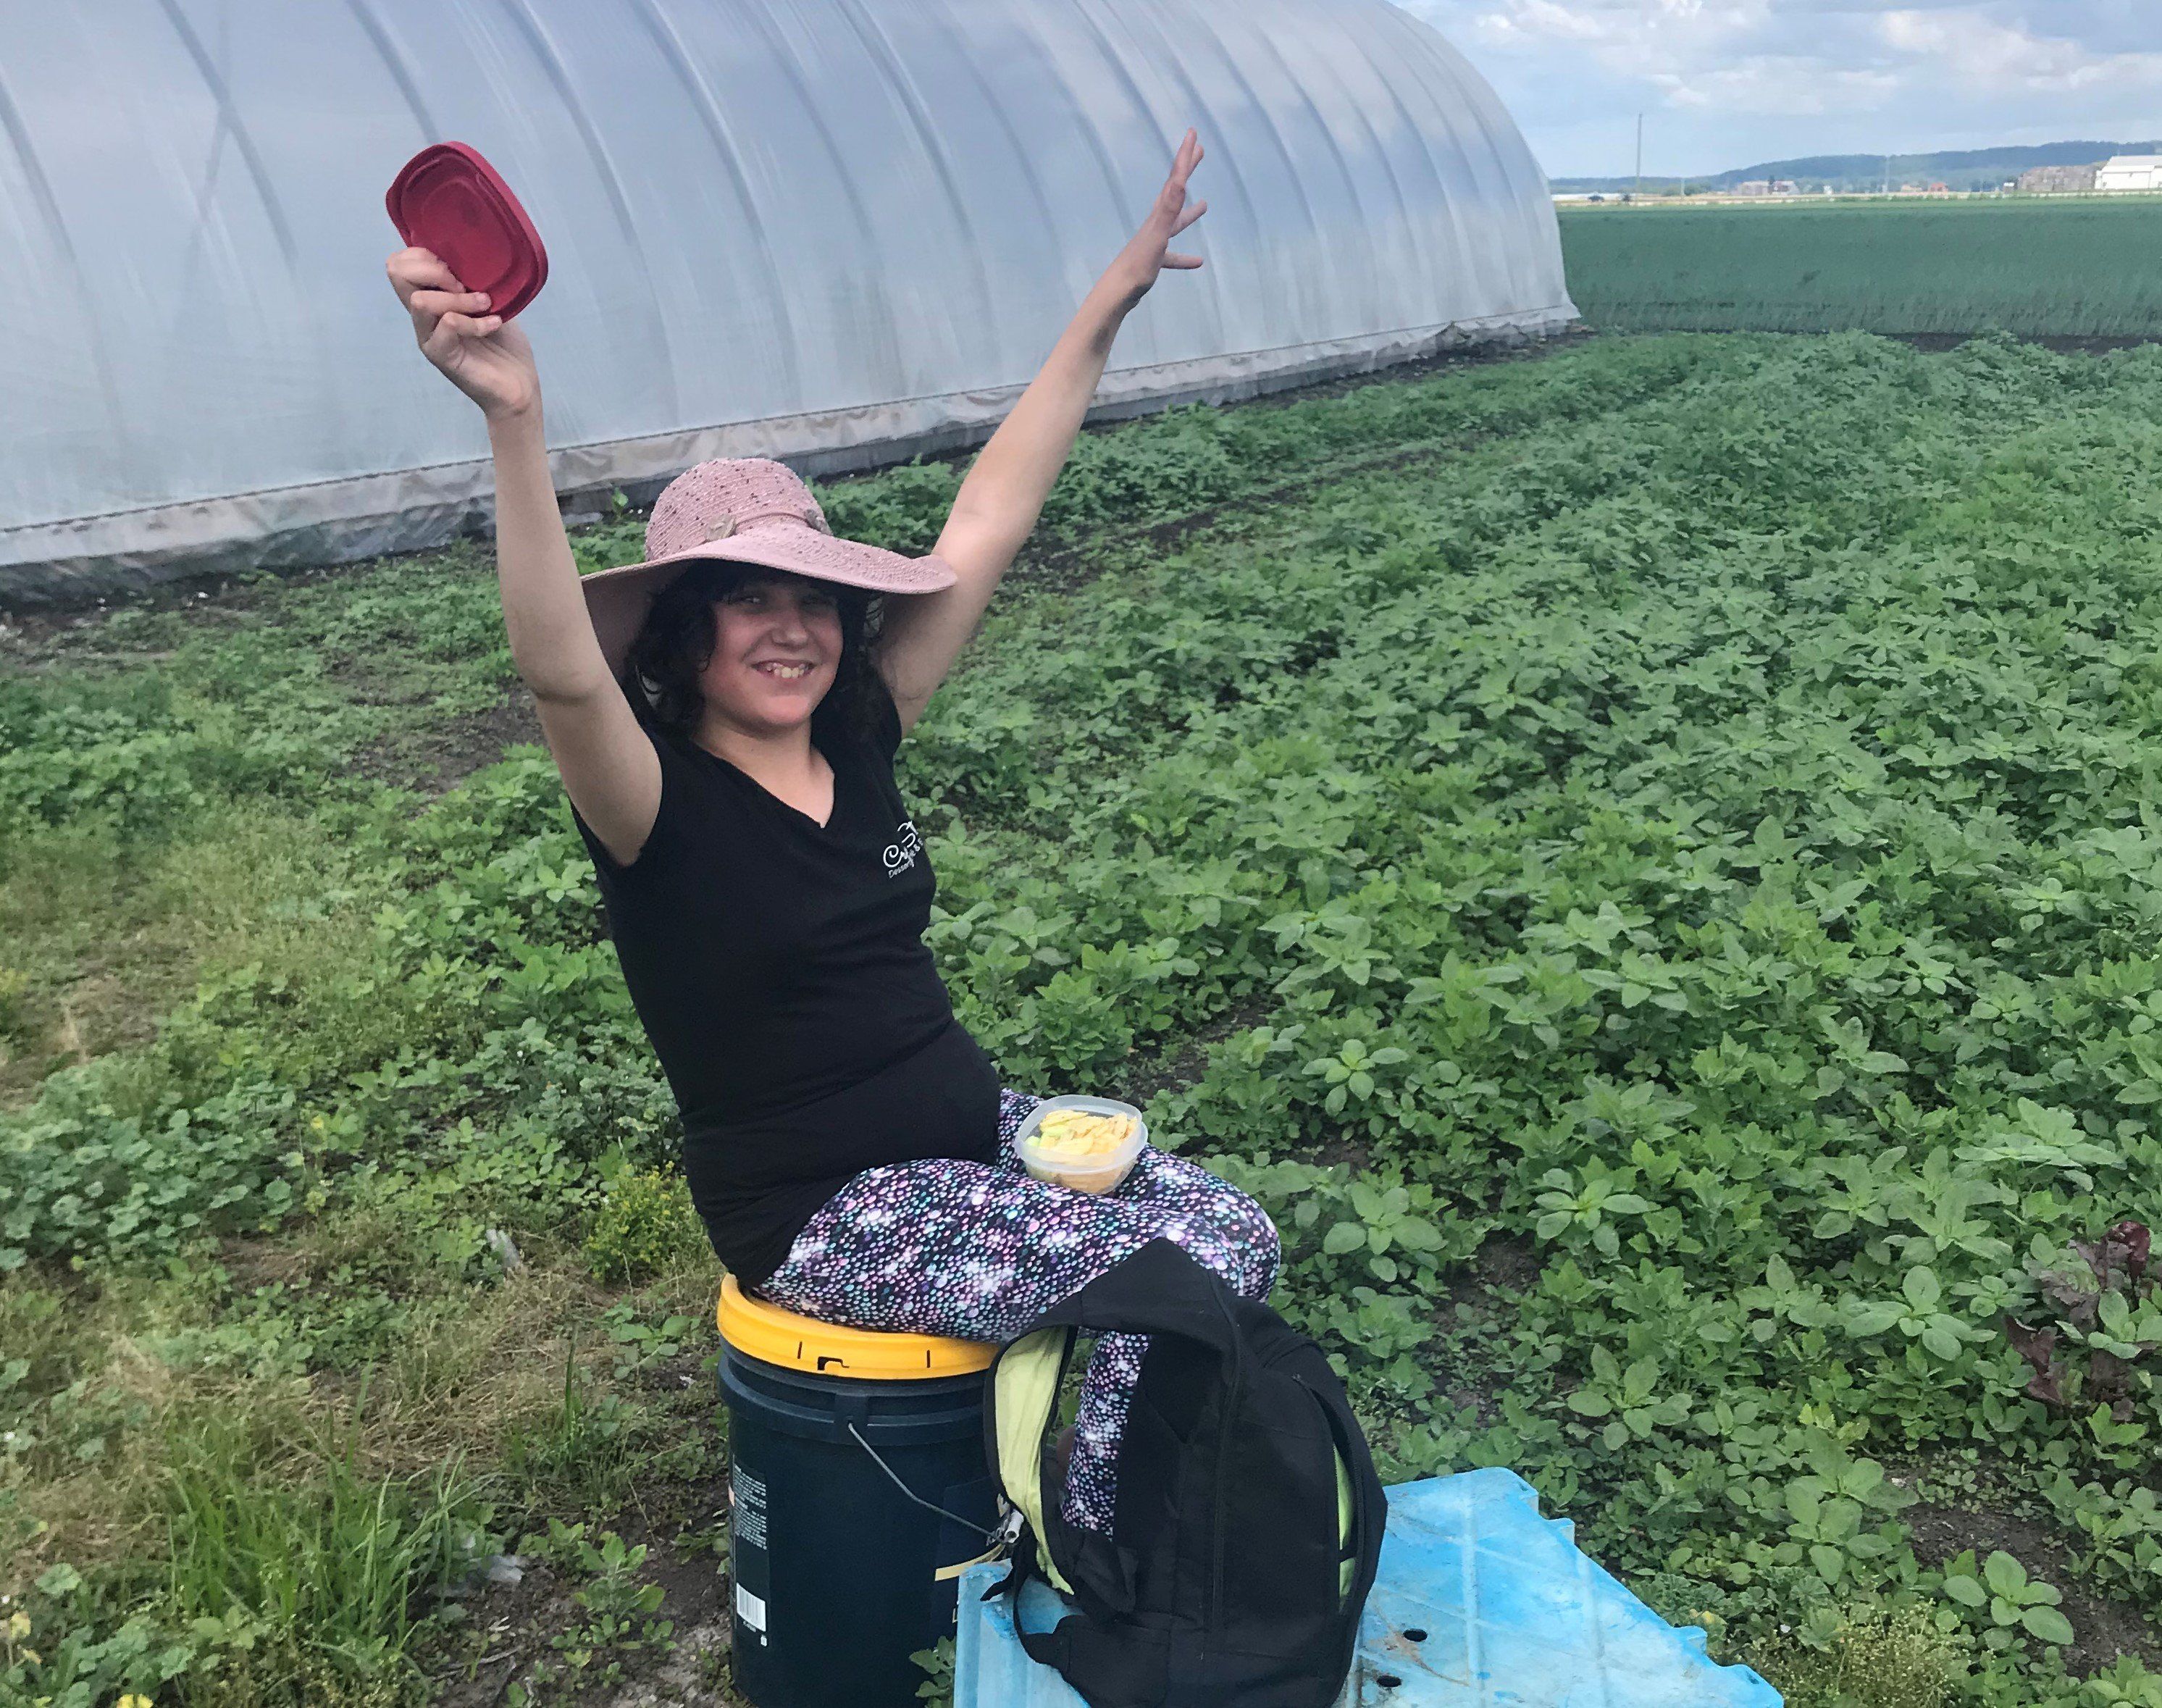 Previous Happening: Farm Happenings for July 2, 2020